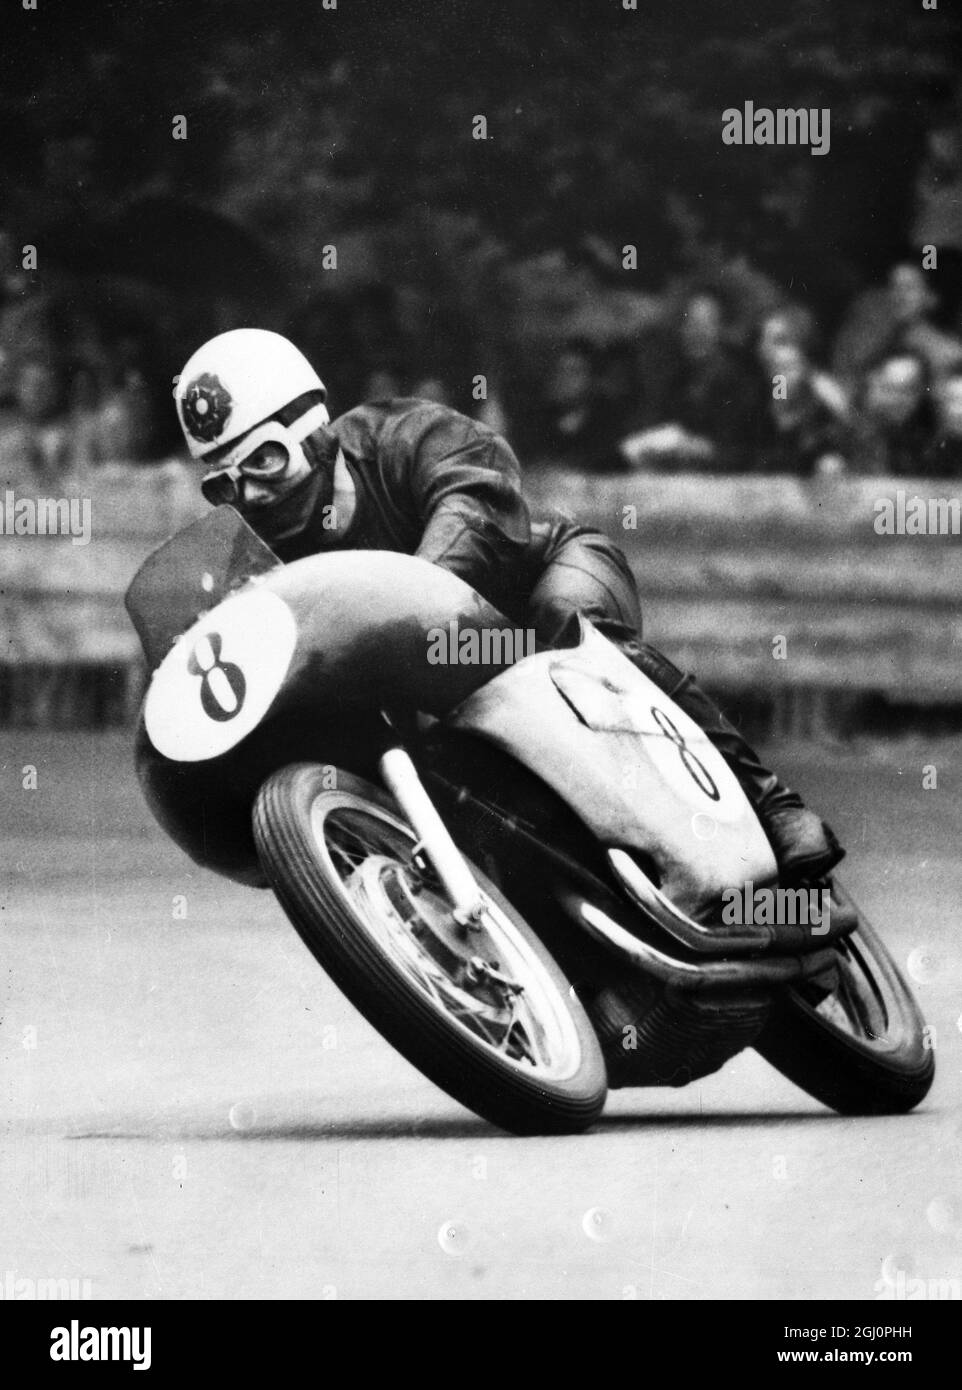 Riding a Gilera , Geoff Duke wins the 500 cc event in the Grand Prix of Berne . He averaged 93.73 miles per hour to beat Ray Amm of Australia by 3.7 seconds . Duke now leads the world championship field by 4 points . 23 August 1954 Stock Photo